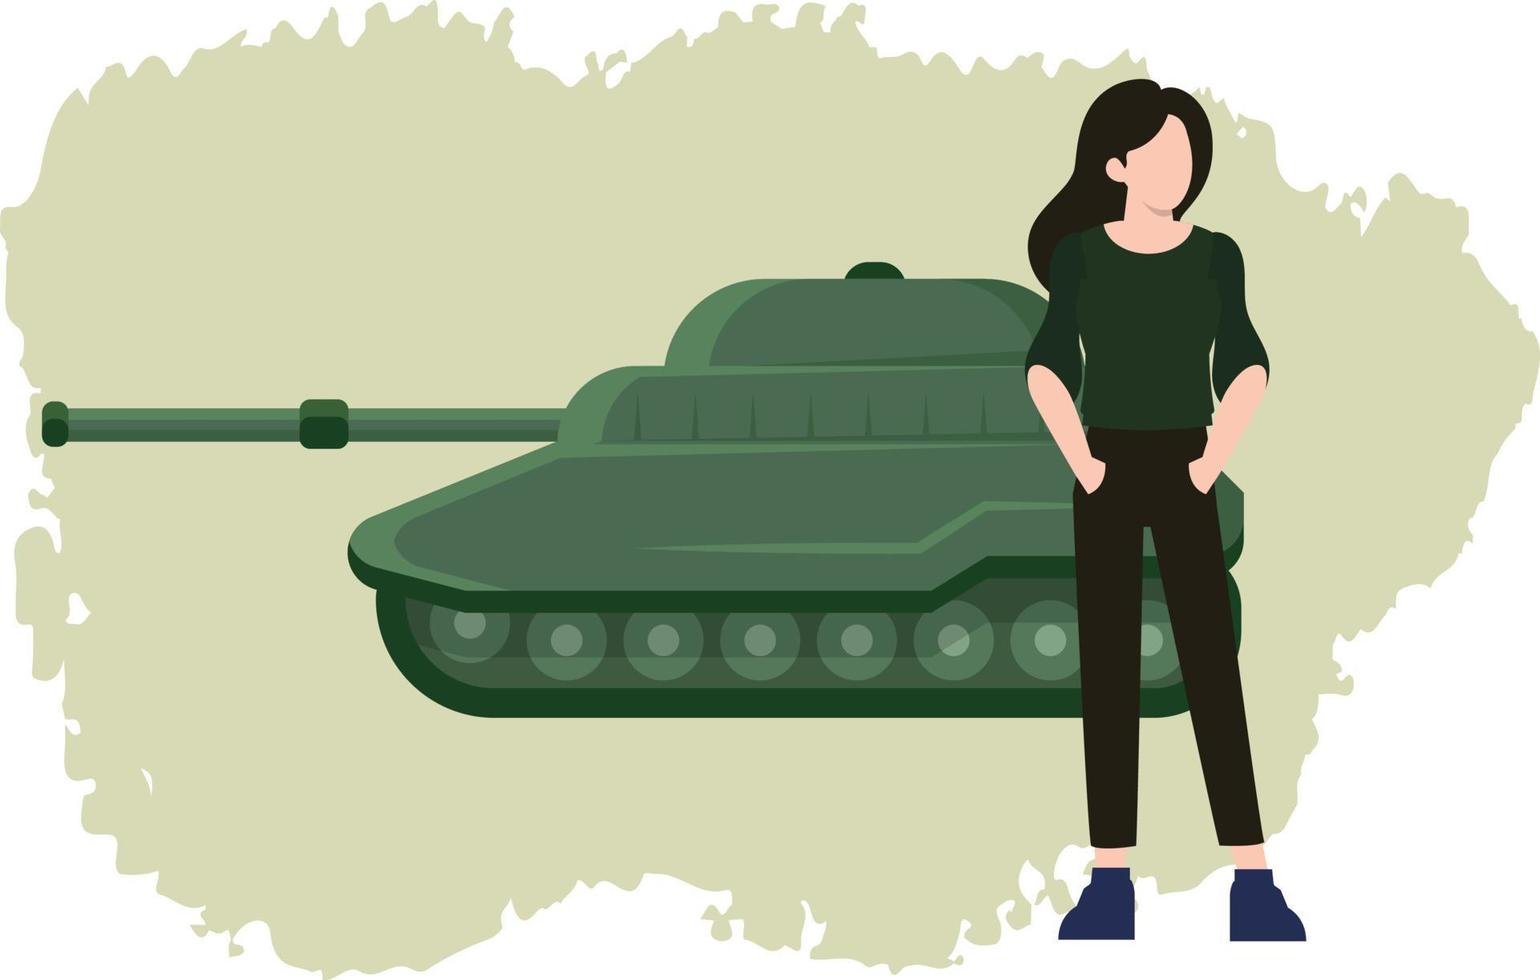 The girl is standing next to a military tank. vector